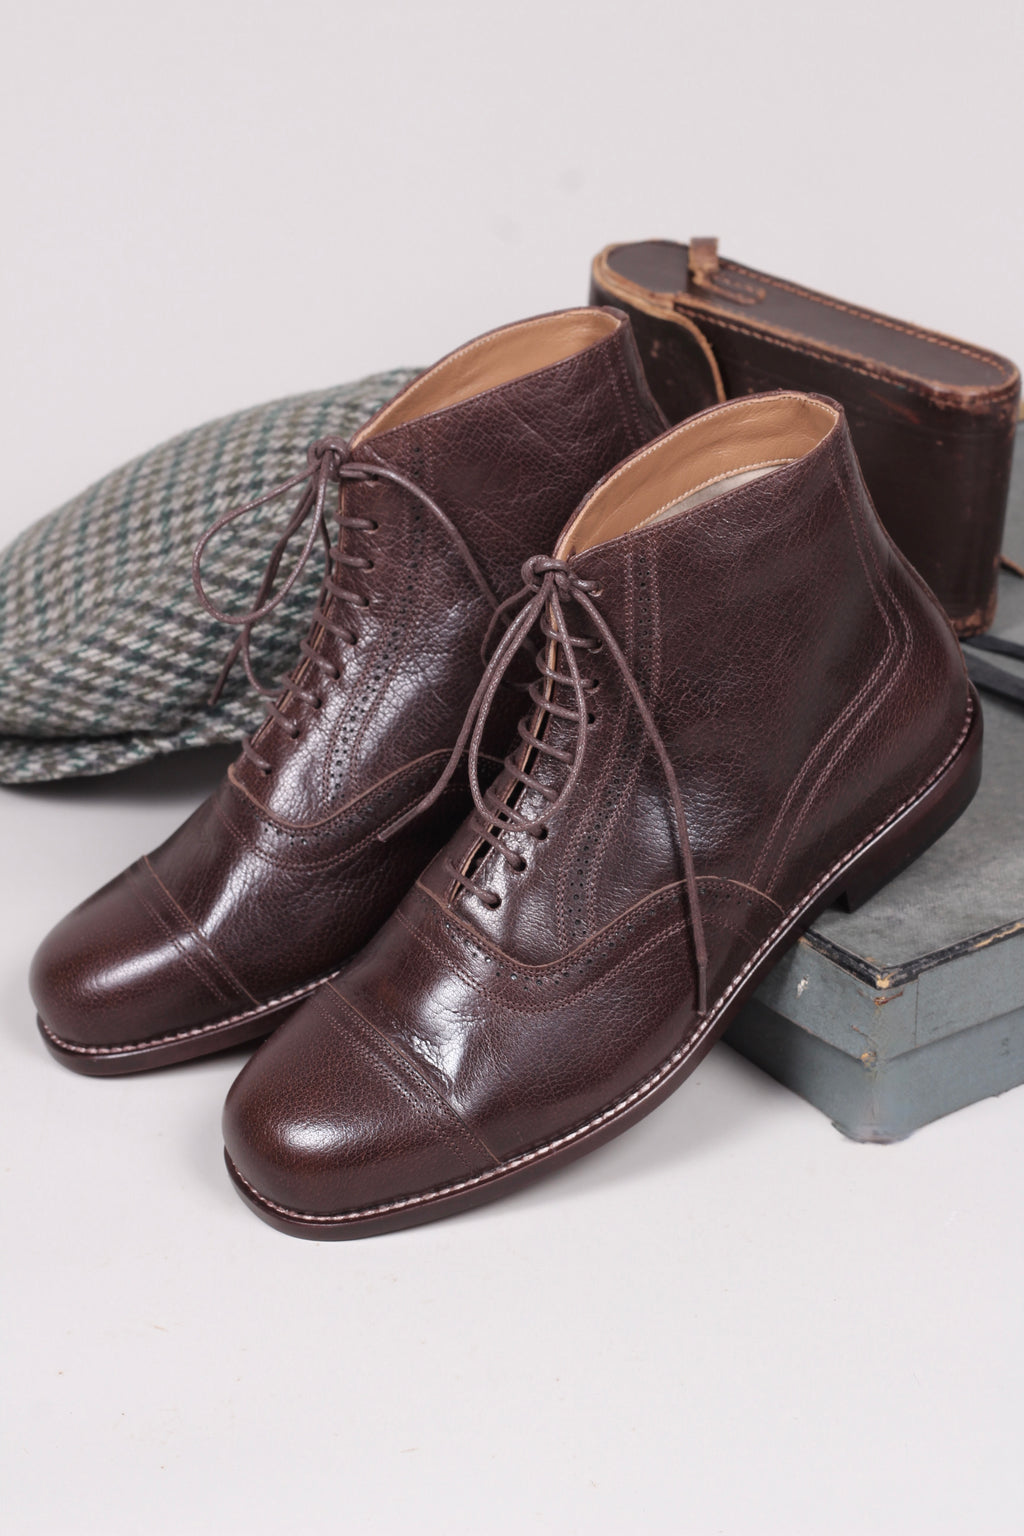 Men's vintage shoes and boots – memery